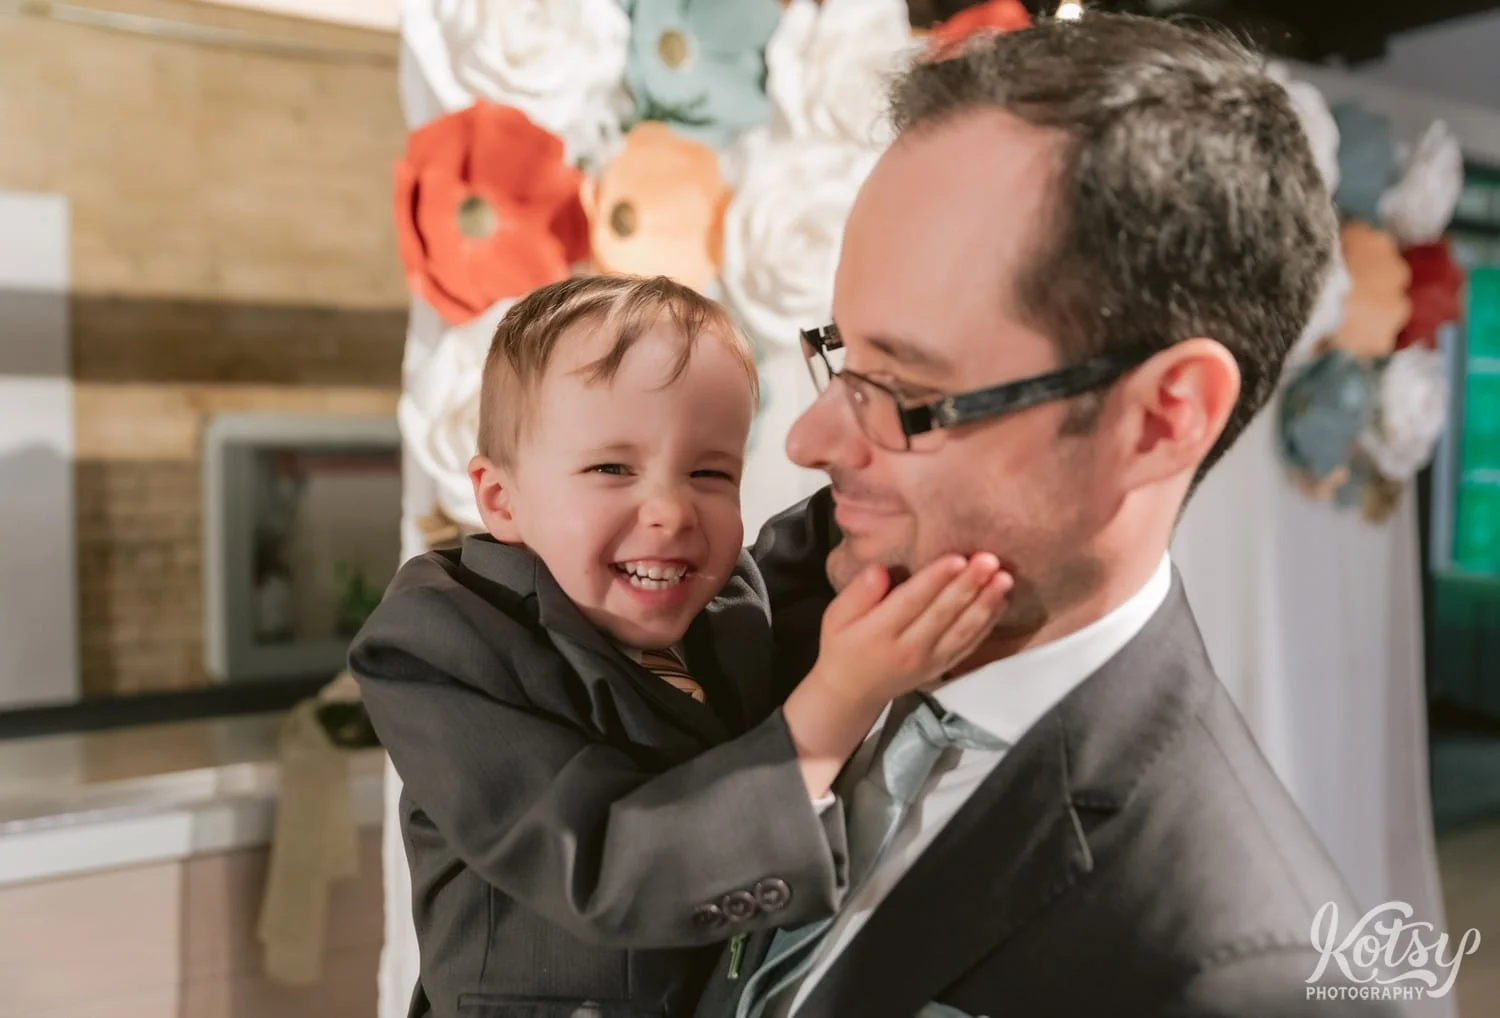 A child is seen smiling for the camera while placing his hand on his father's cheek during a Second Floor Events wedding reception in Toronto, Canada.